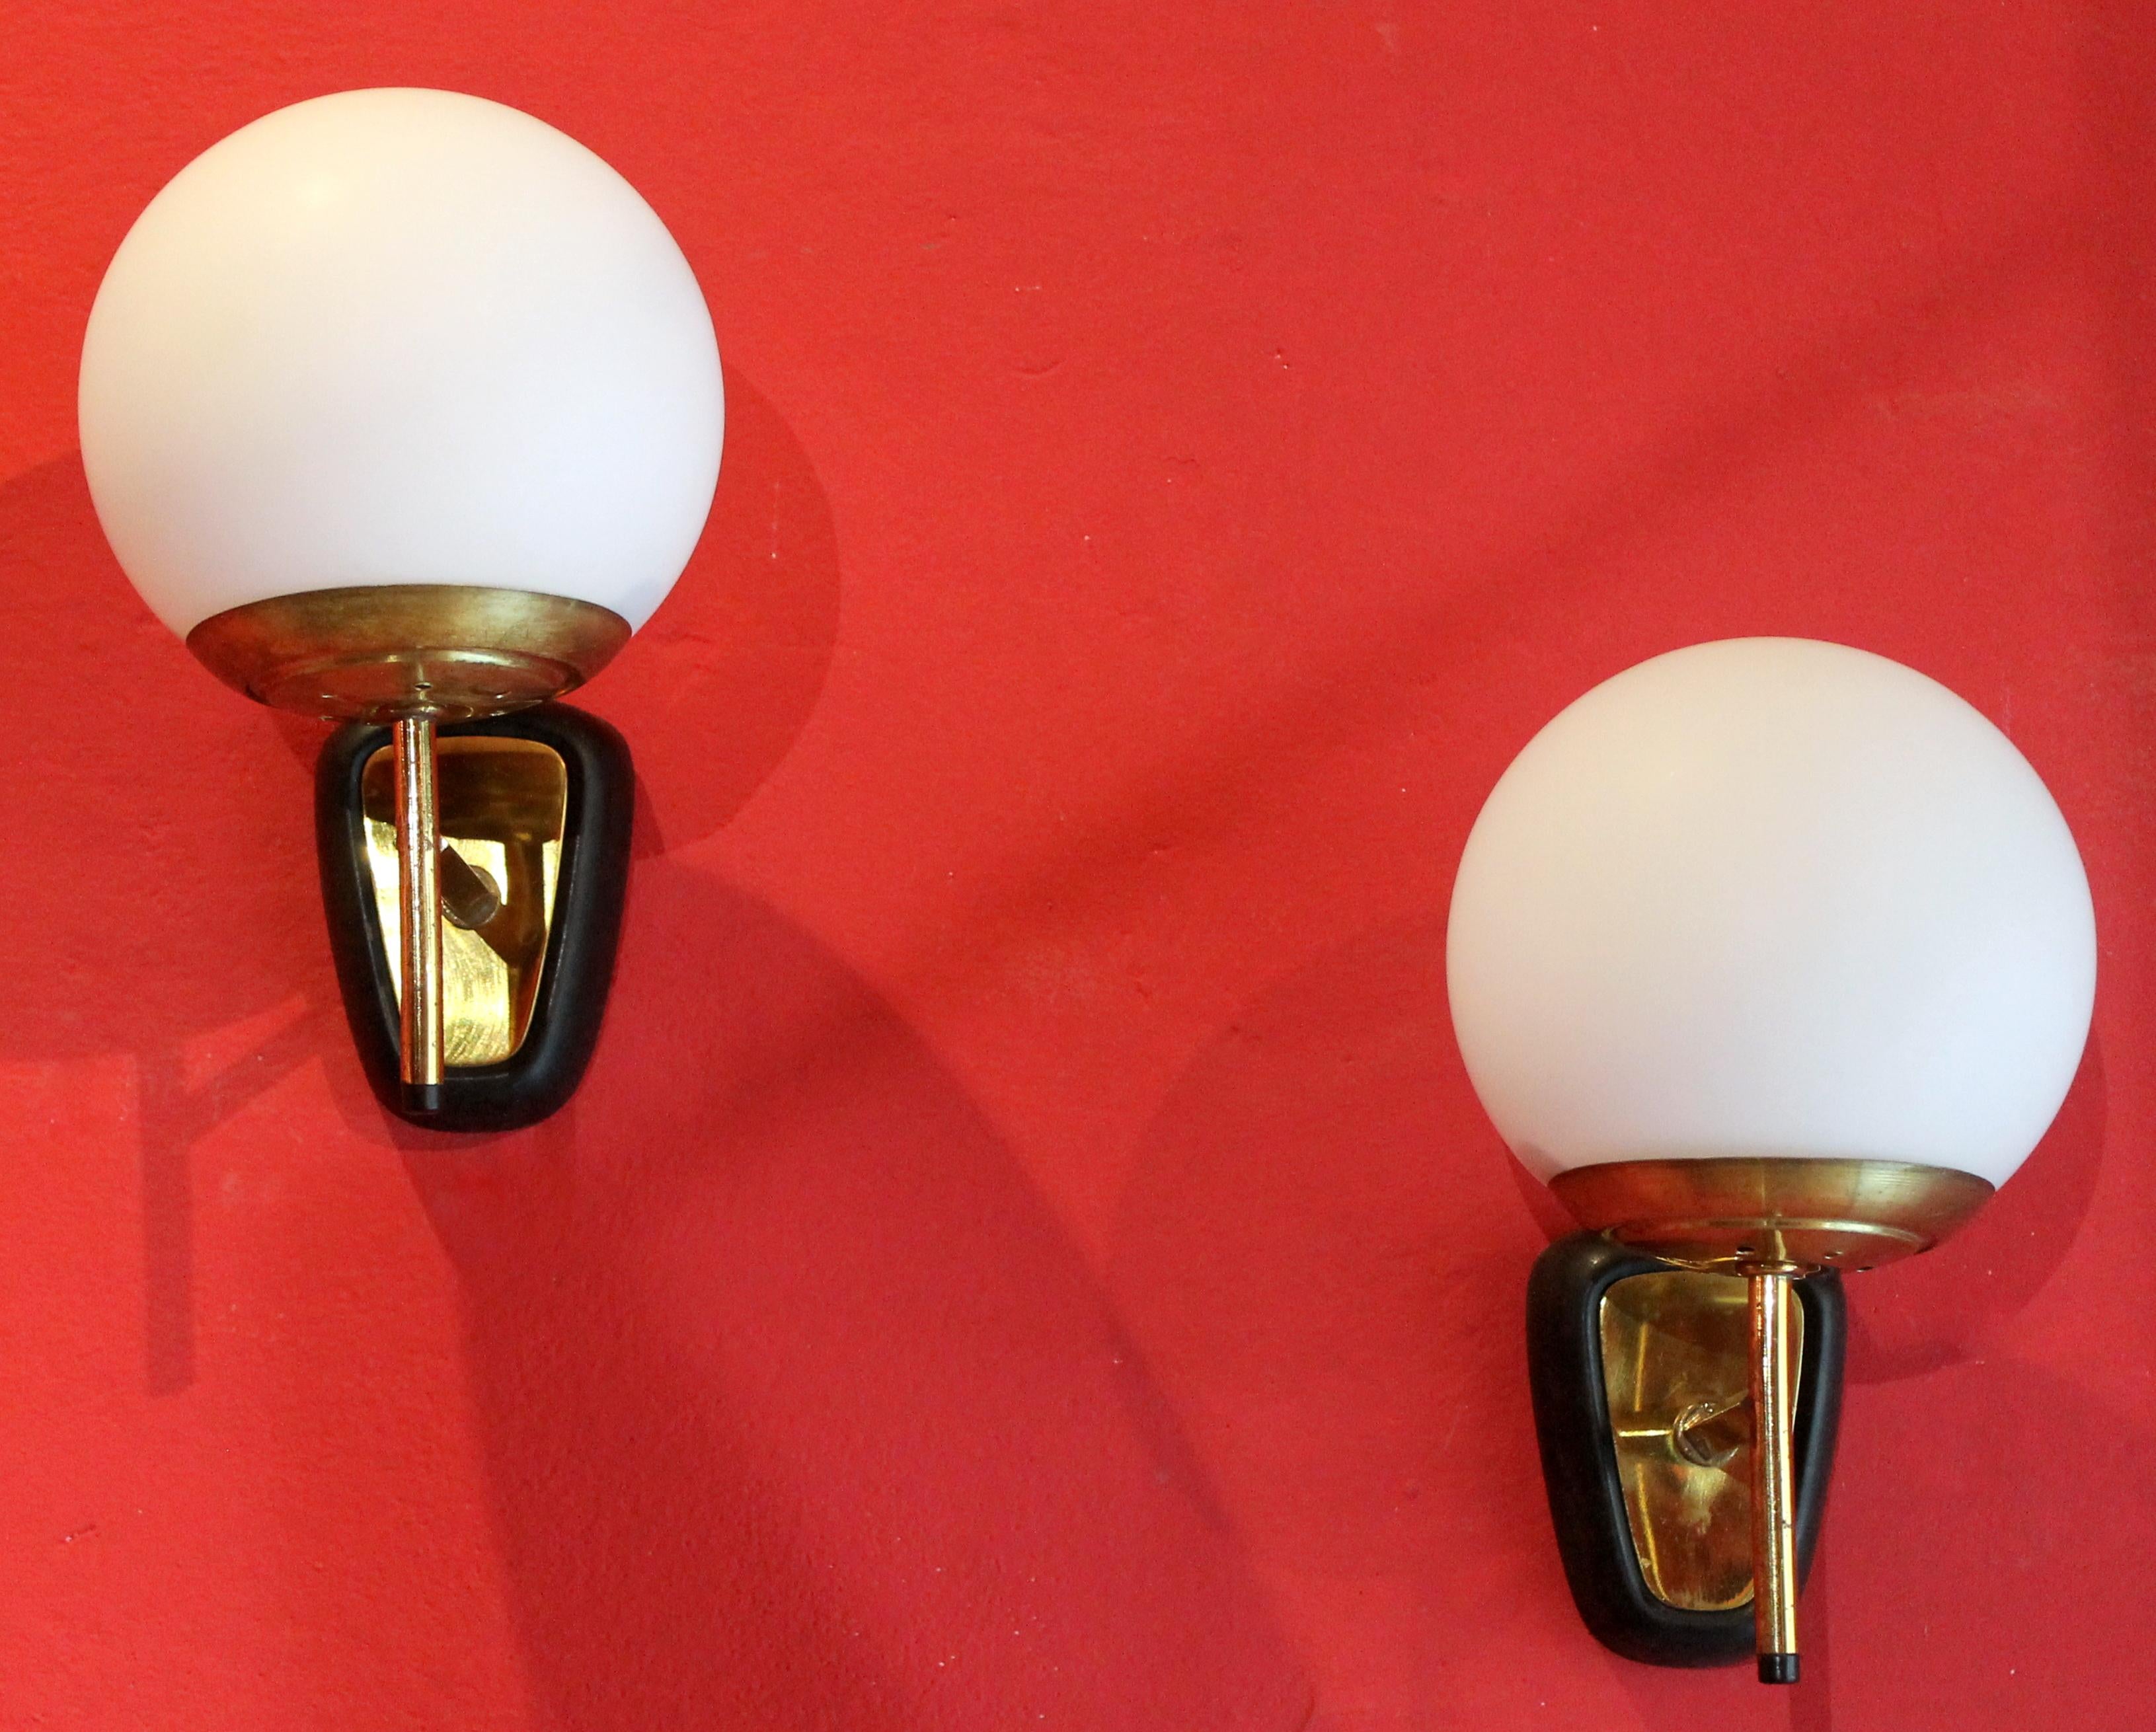 This pair of Mid-Century Modern Italian design modernist wall light in the style of Stilnovo has one gilt brass arm holding a glass ball shaped shades resting on round concave gilt brass bobeche.
Each gilt brass arm with black lacquered final is